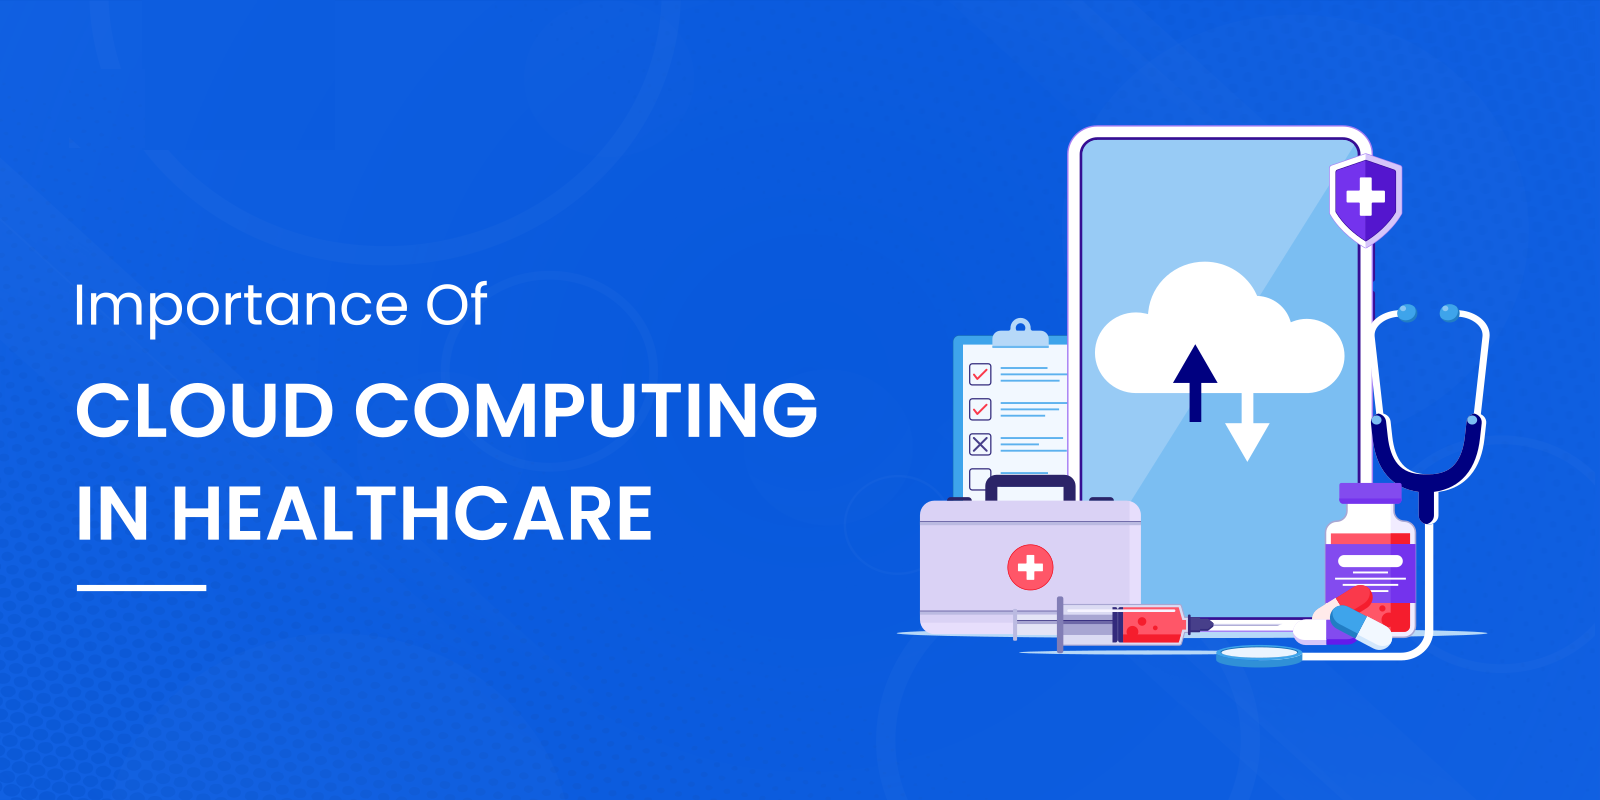 The Importance Of Cloud Computing In Healthcare Industry